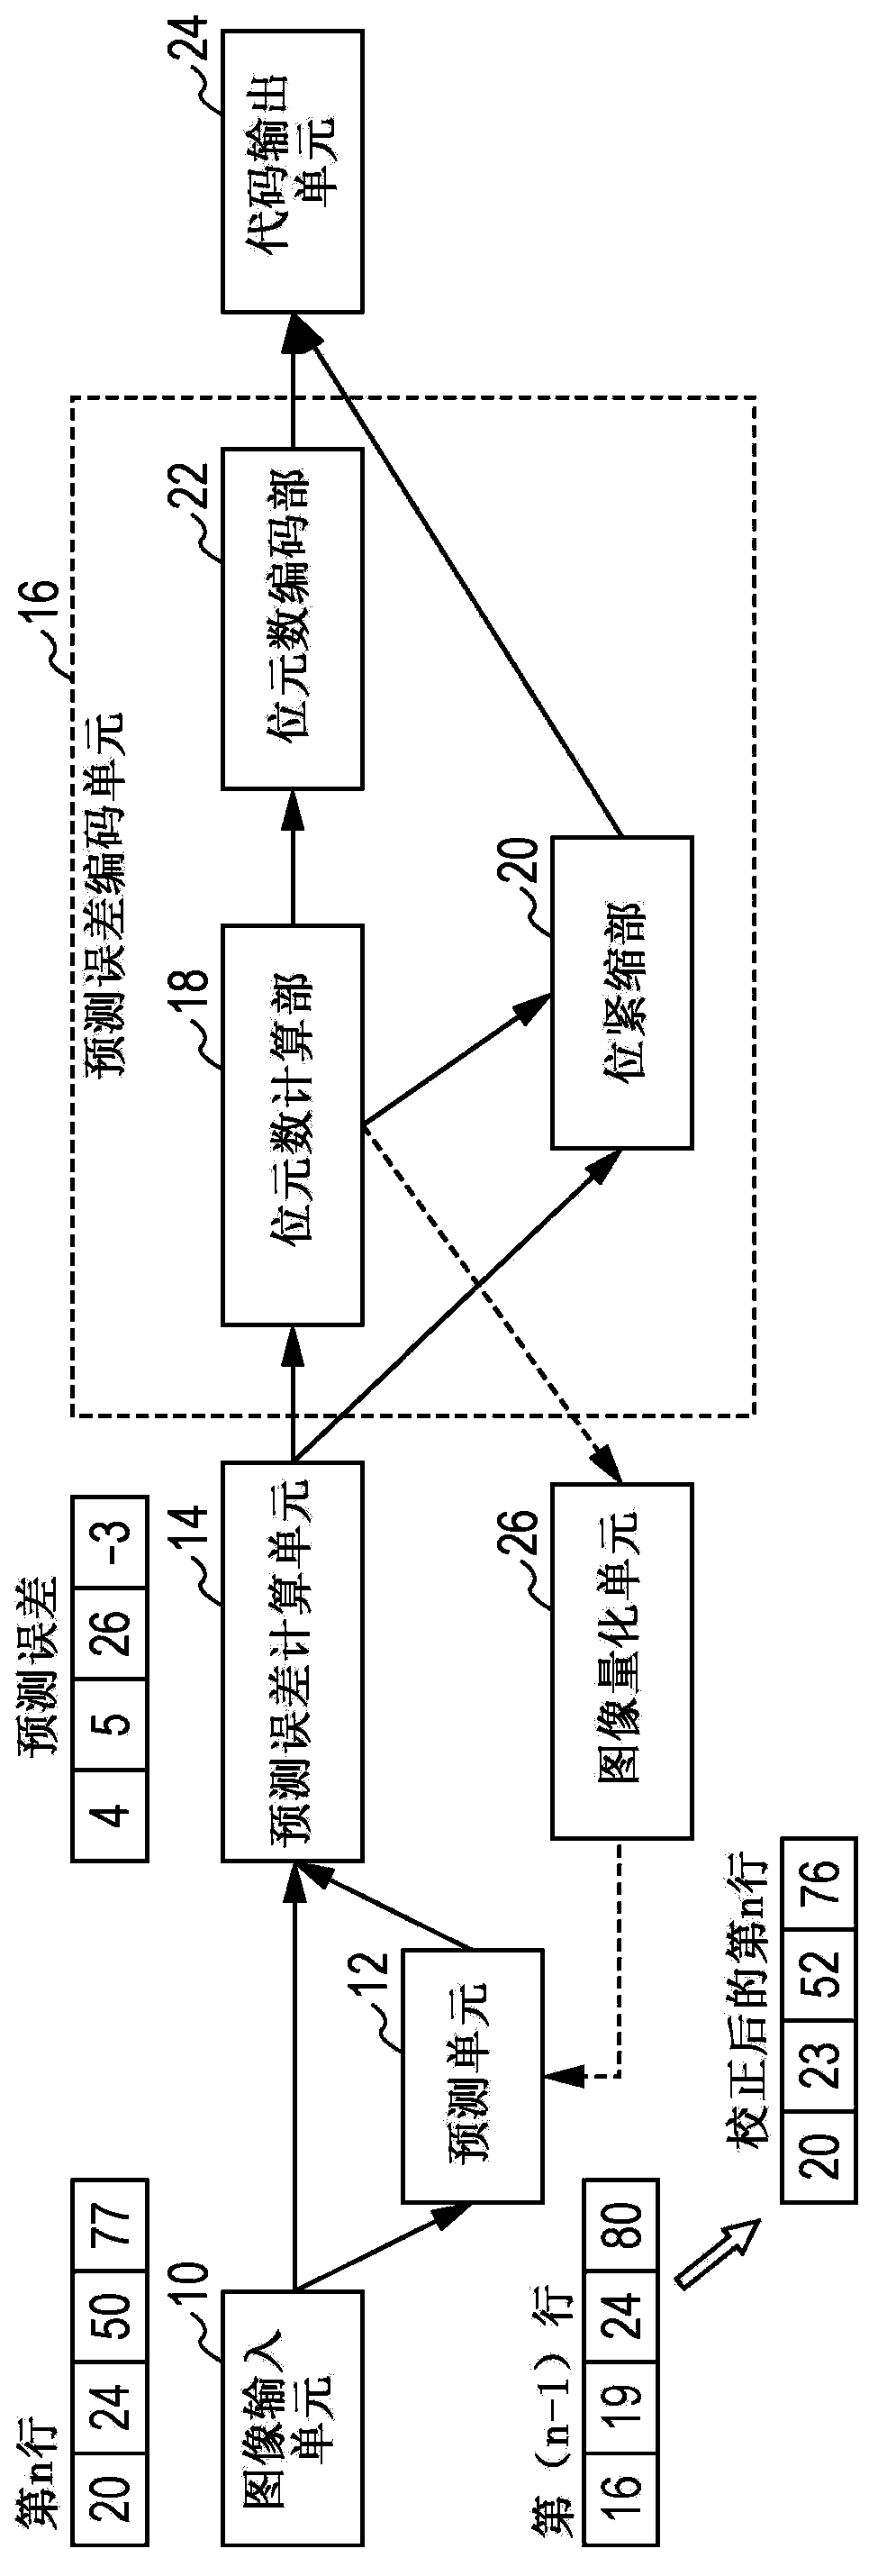 Image encoding apparatus and method, and image decoding apparatus and method